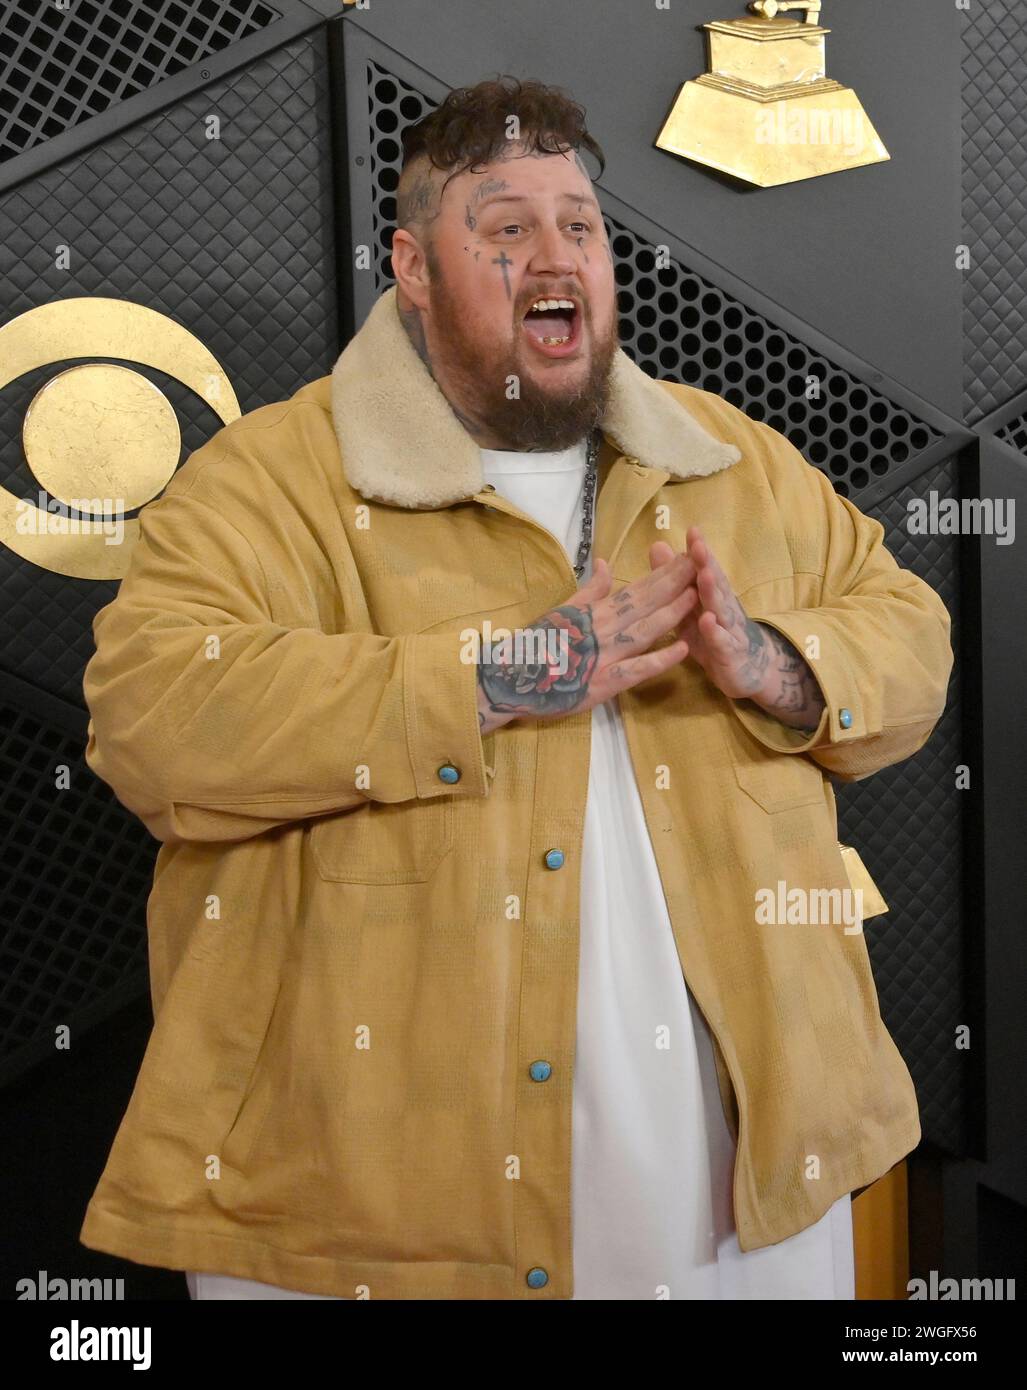 Jelly Roll attends the 66th annual Grammy Awards at the